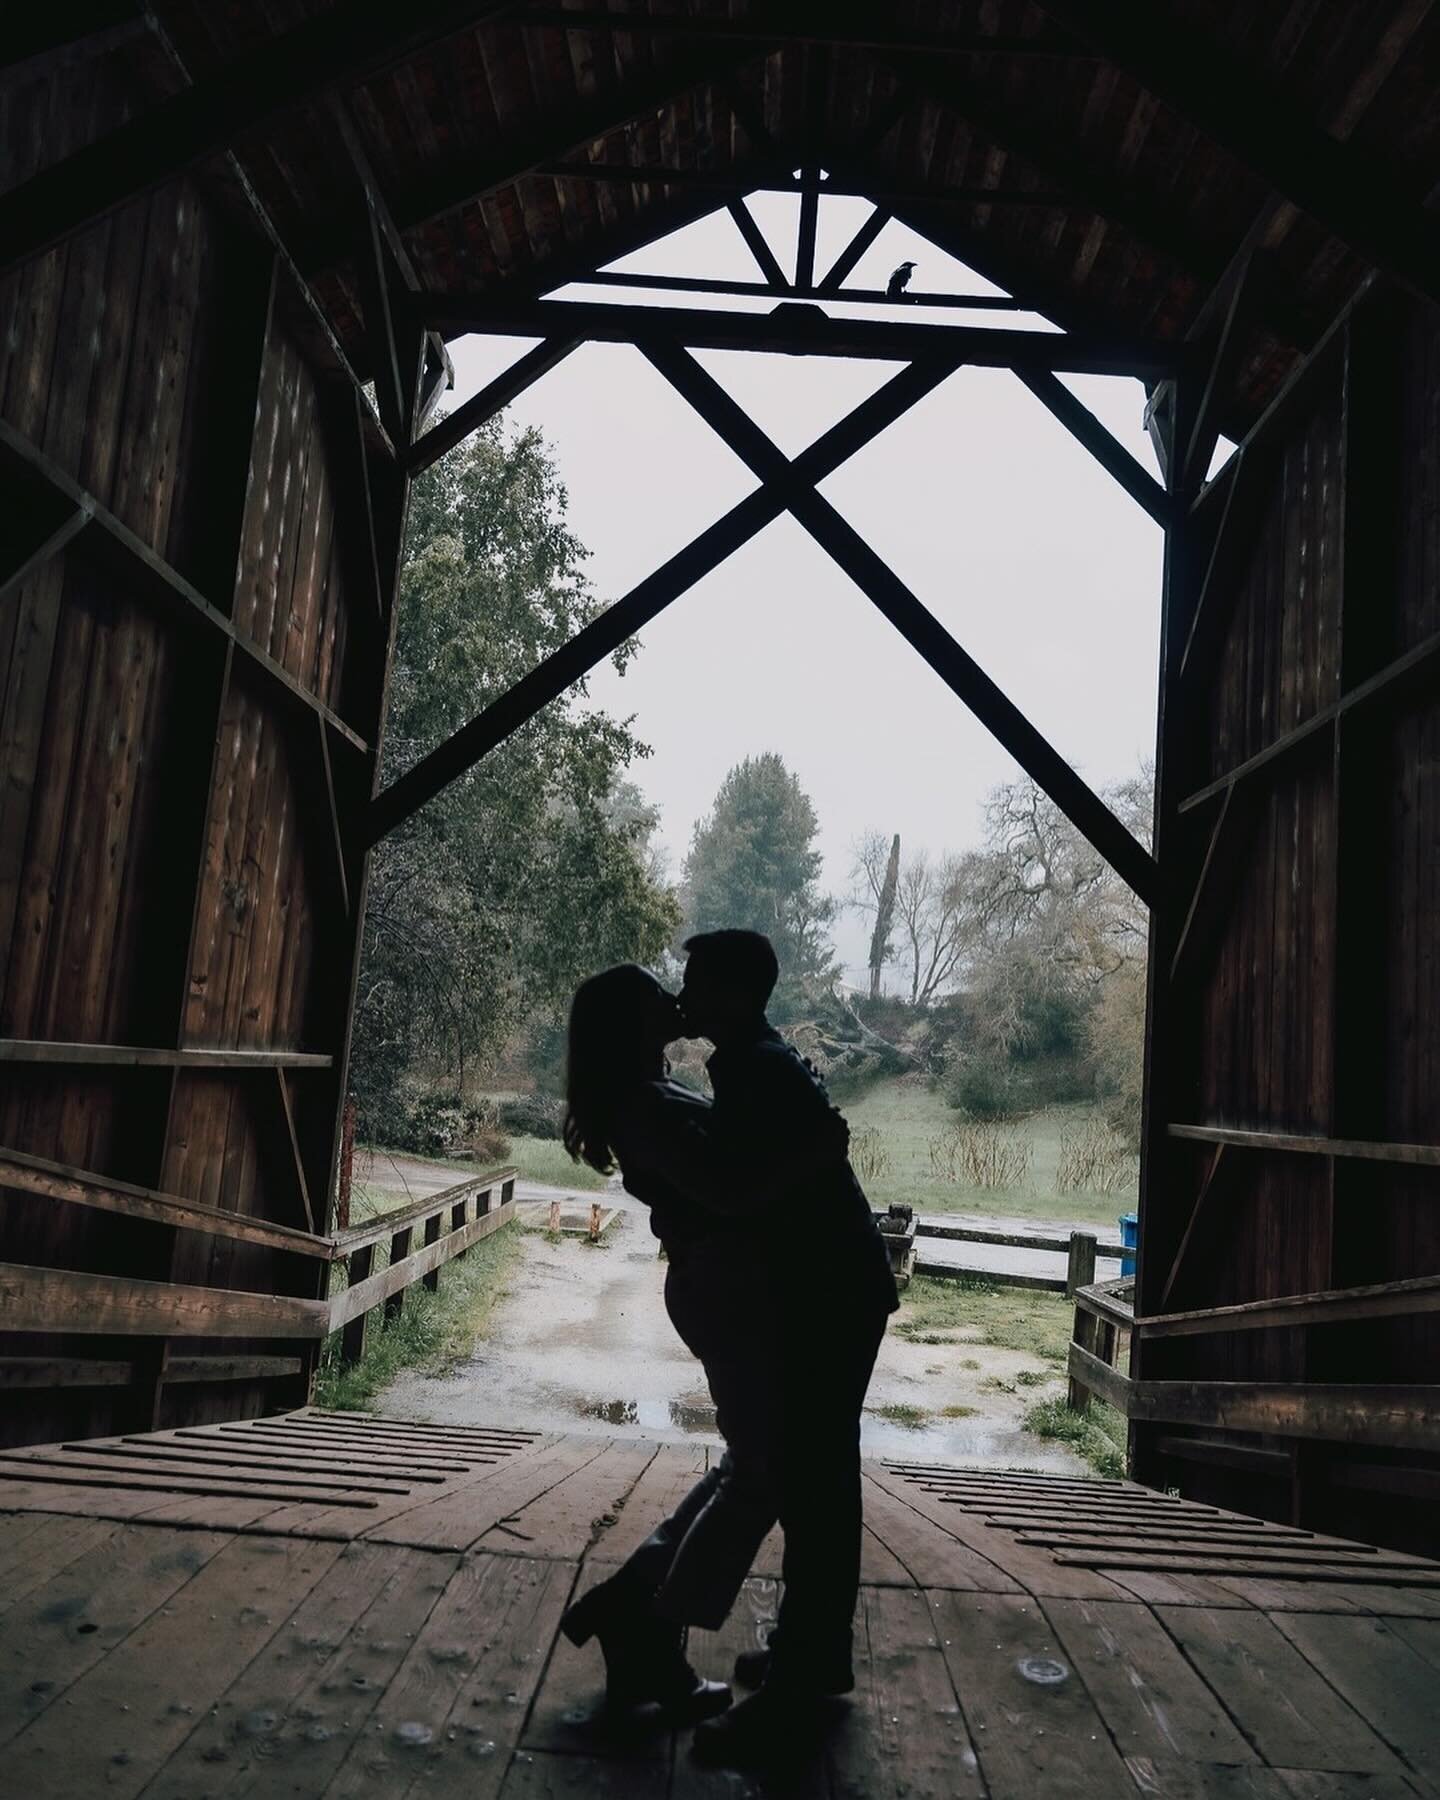 More from this fun rainy engagement session. The rain made this experience unforgettable!